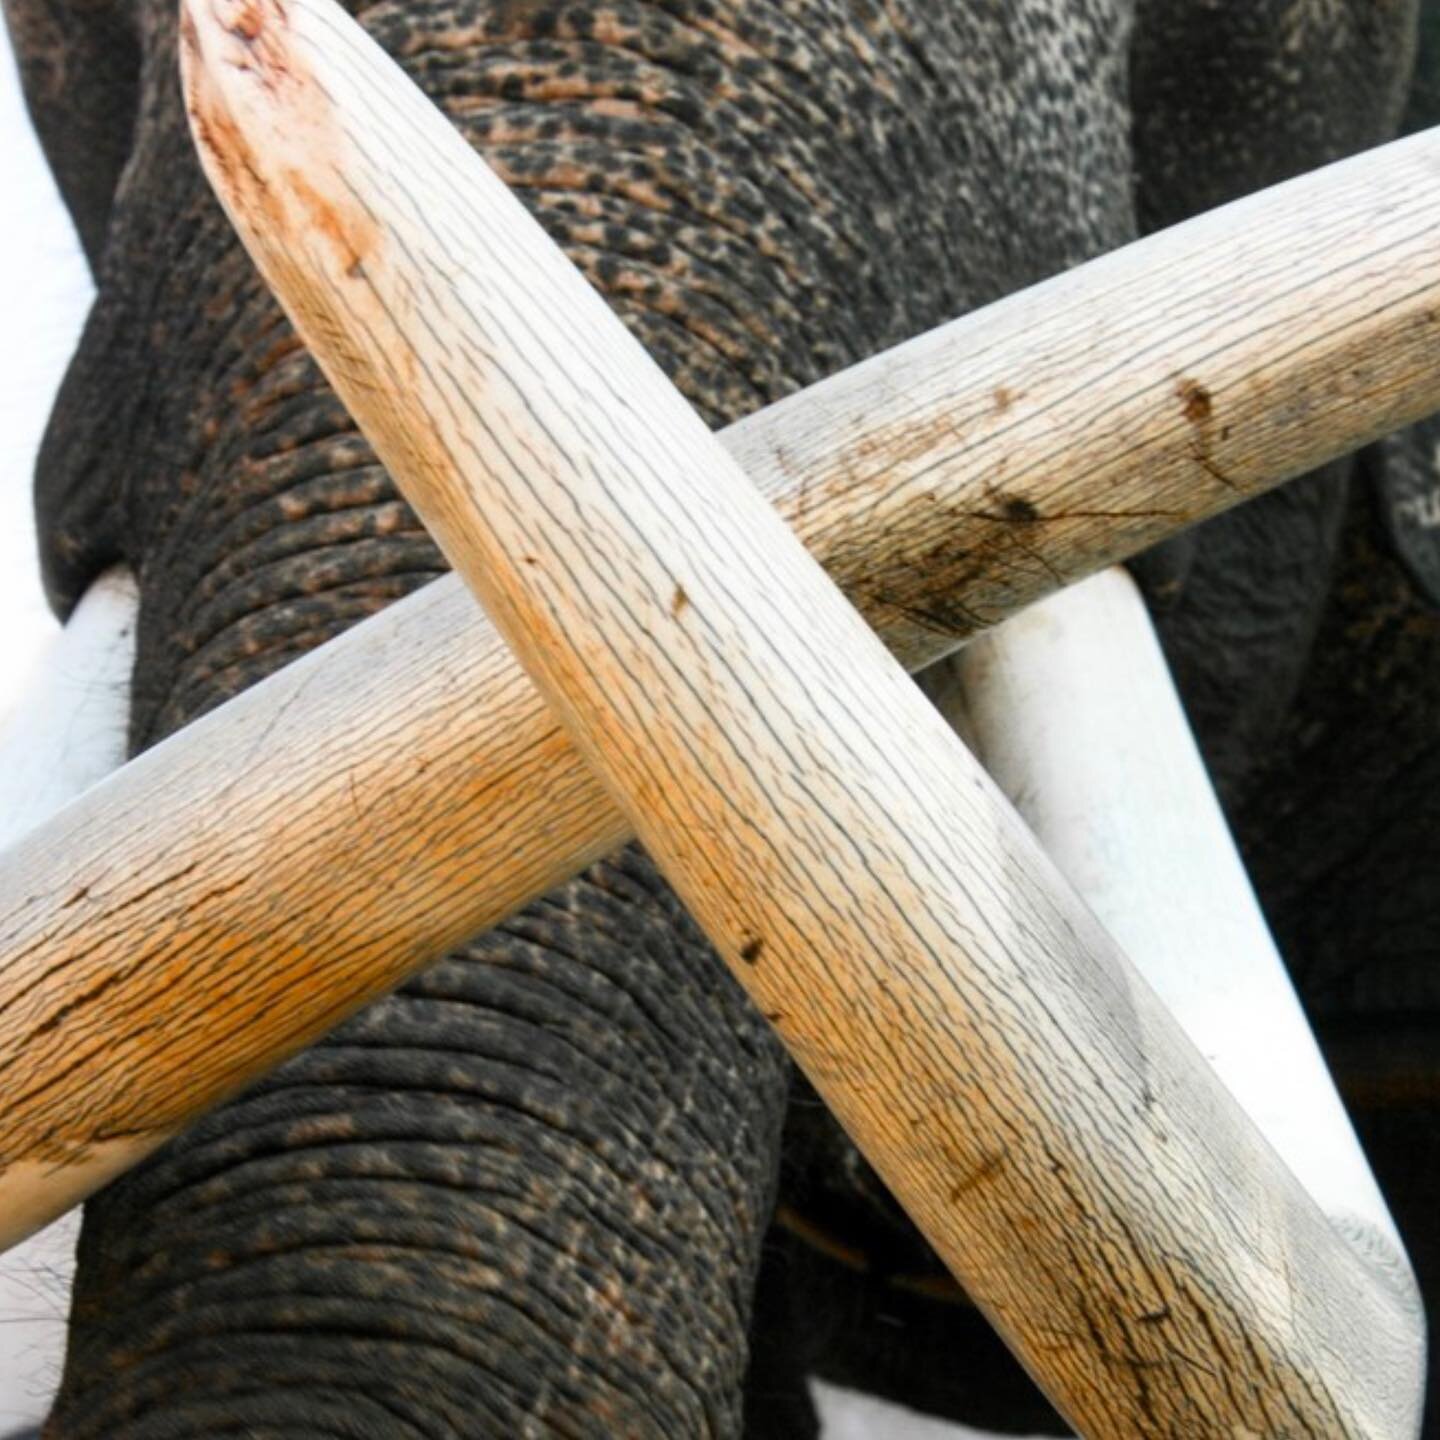 As a homeopathic remedy IVORY encompass recognisable qualities both in its tendencies towards physical, mental and emotional pathological states. Elephants are known to migrate along defined paths which they will make considered decisions on choosing